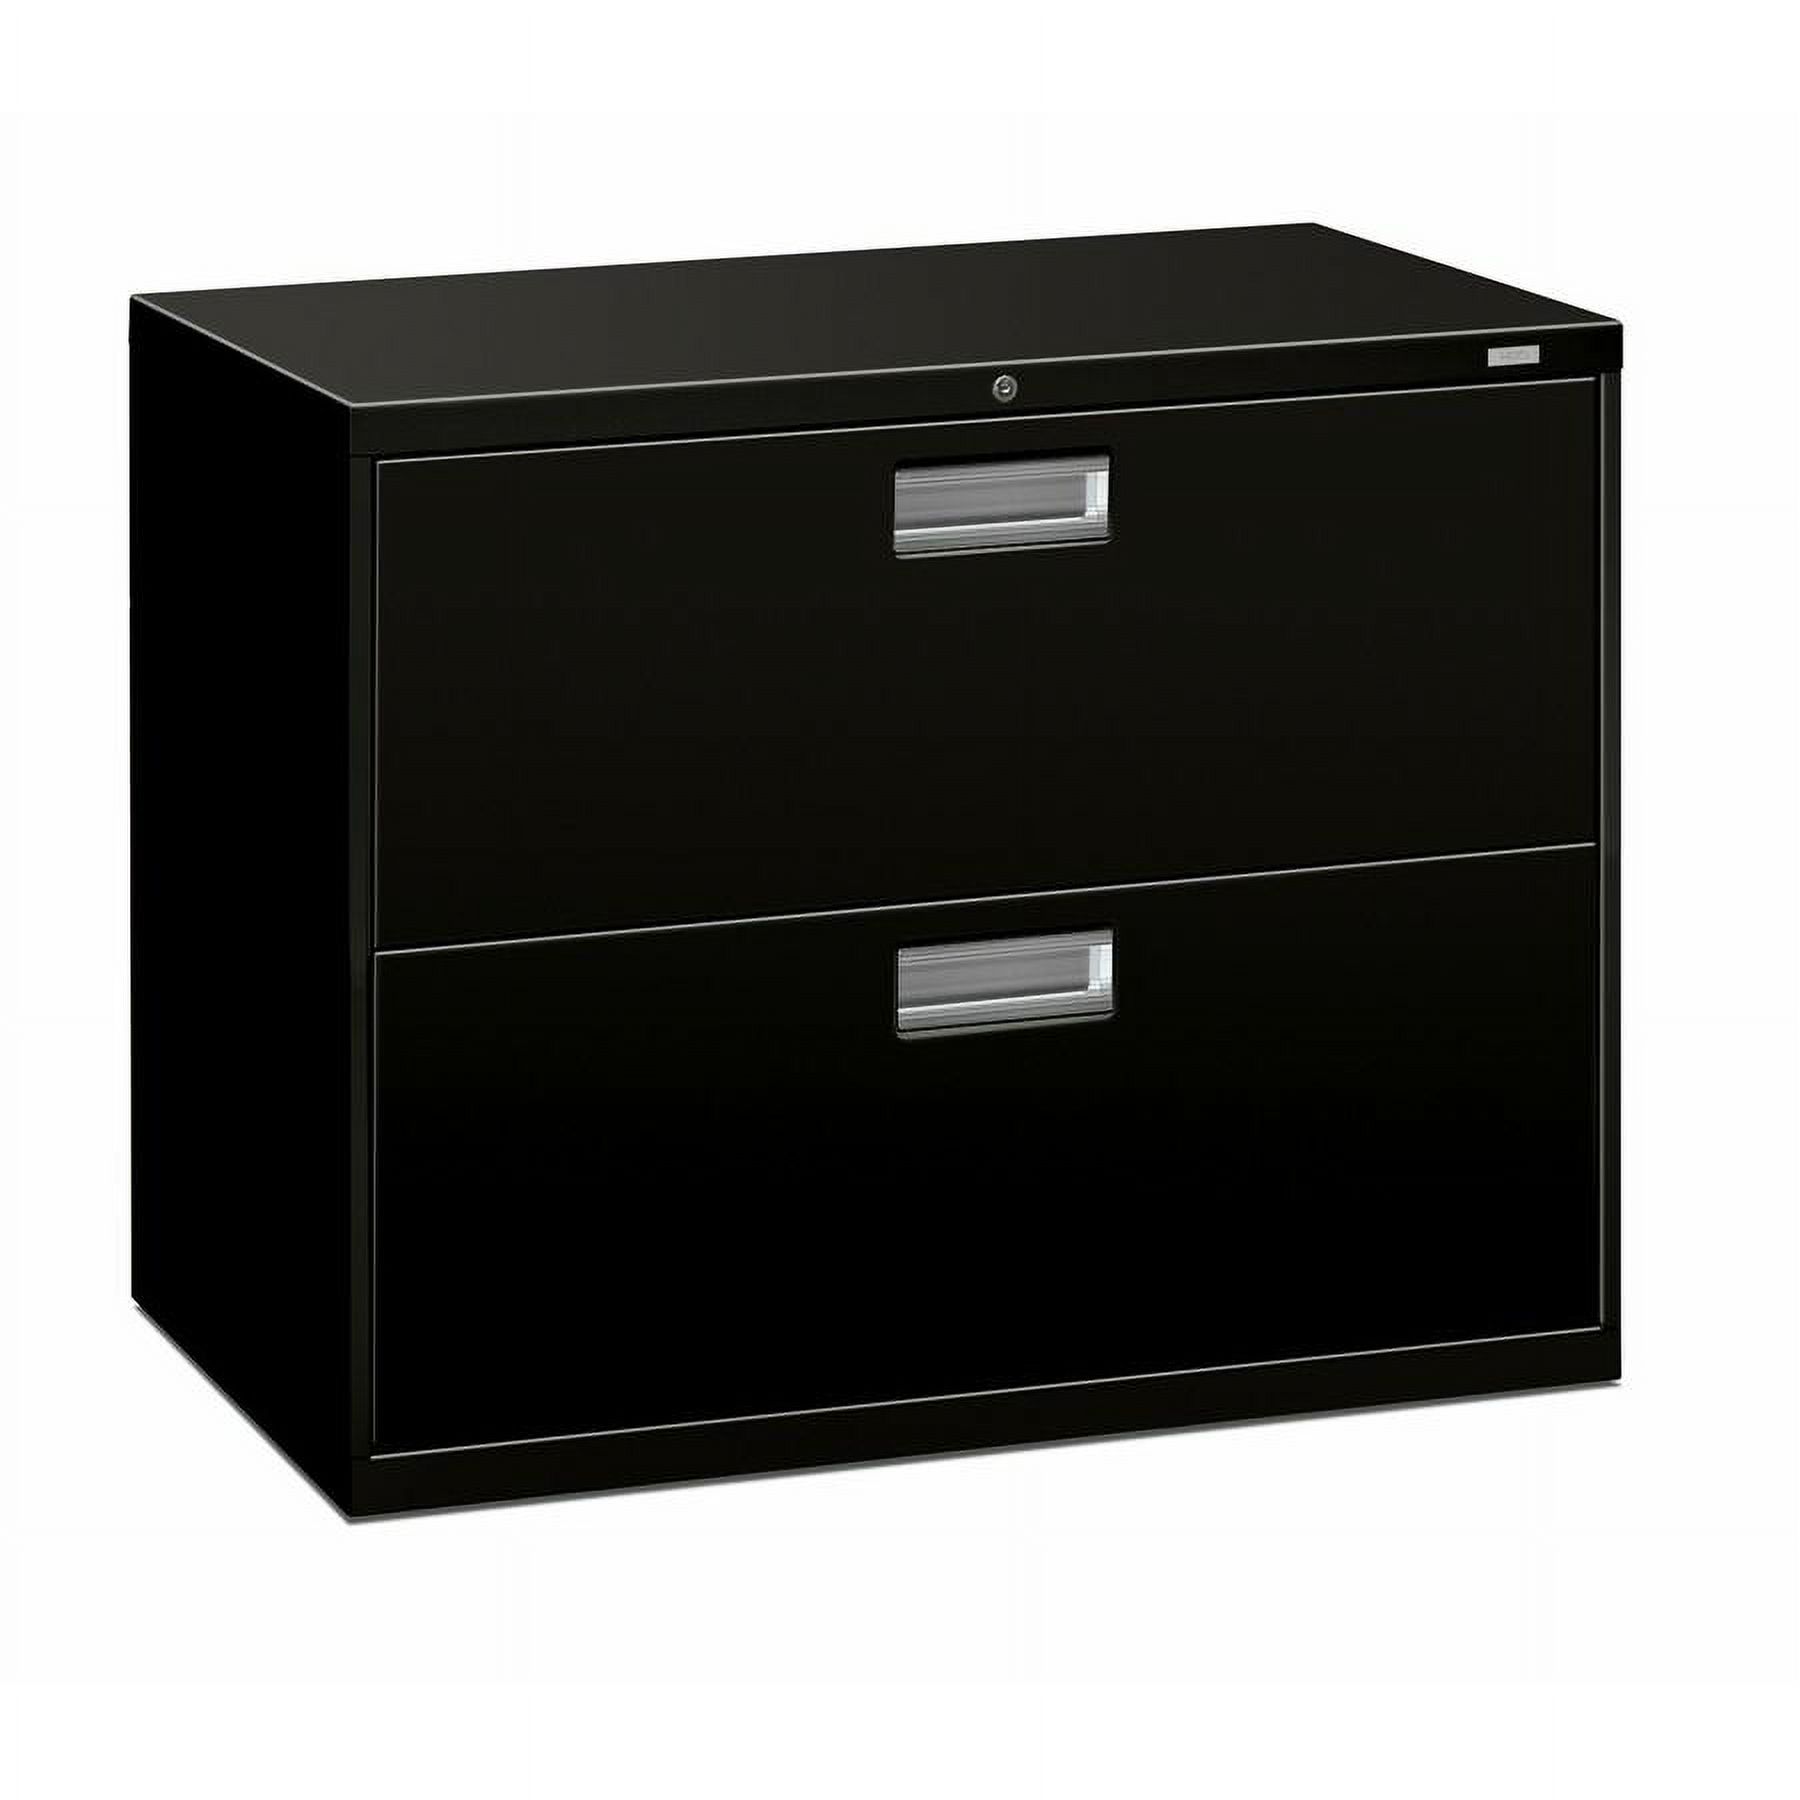 HON 2-Drawer Filing Cabinet - 600 Series Lateral Legal or Letter File Cabinet, Black (H682) - image 2 of 2